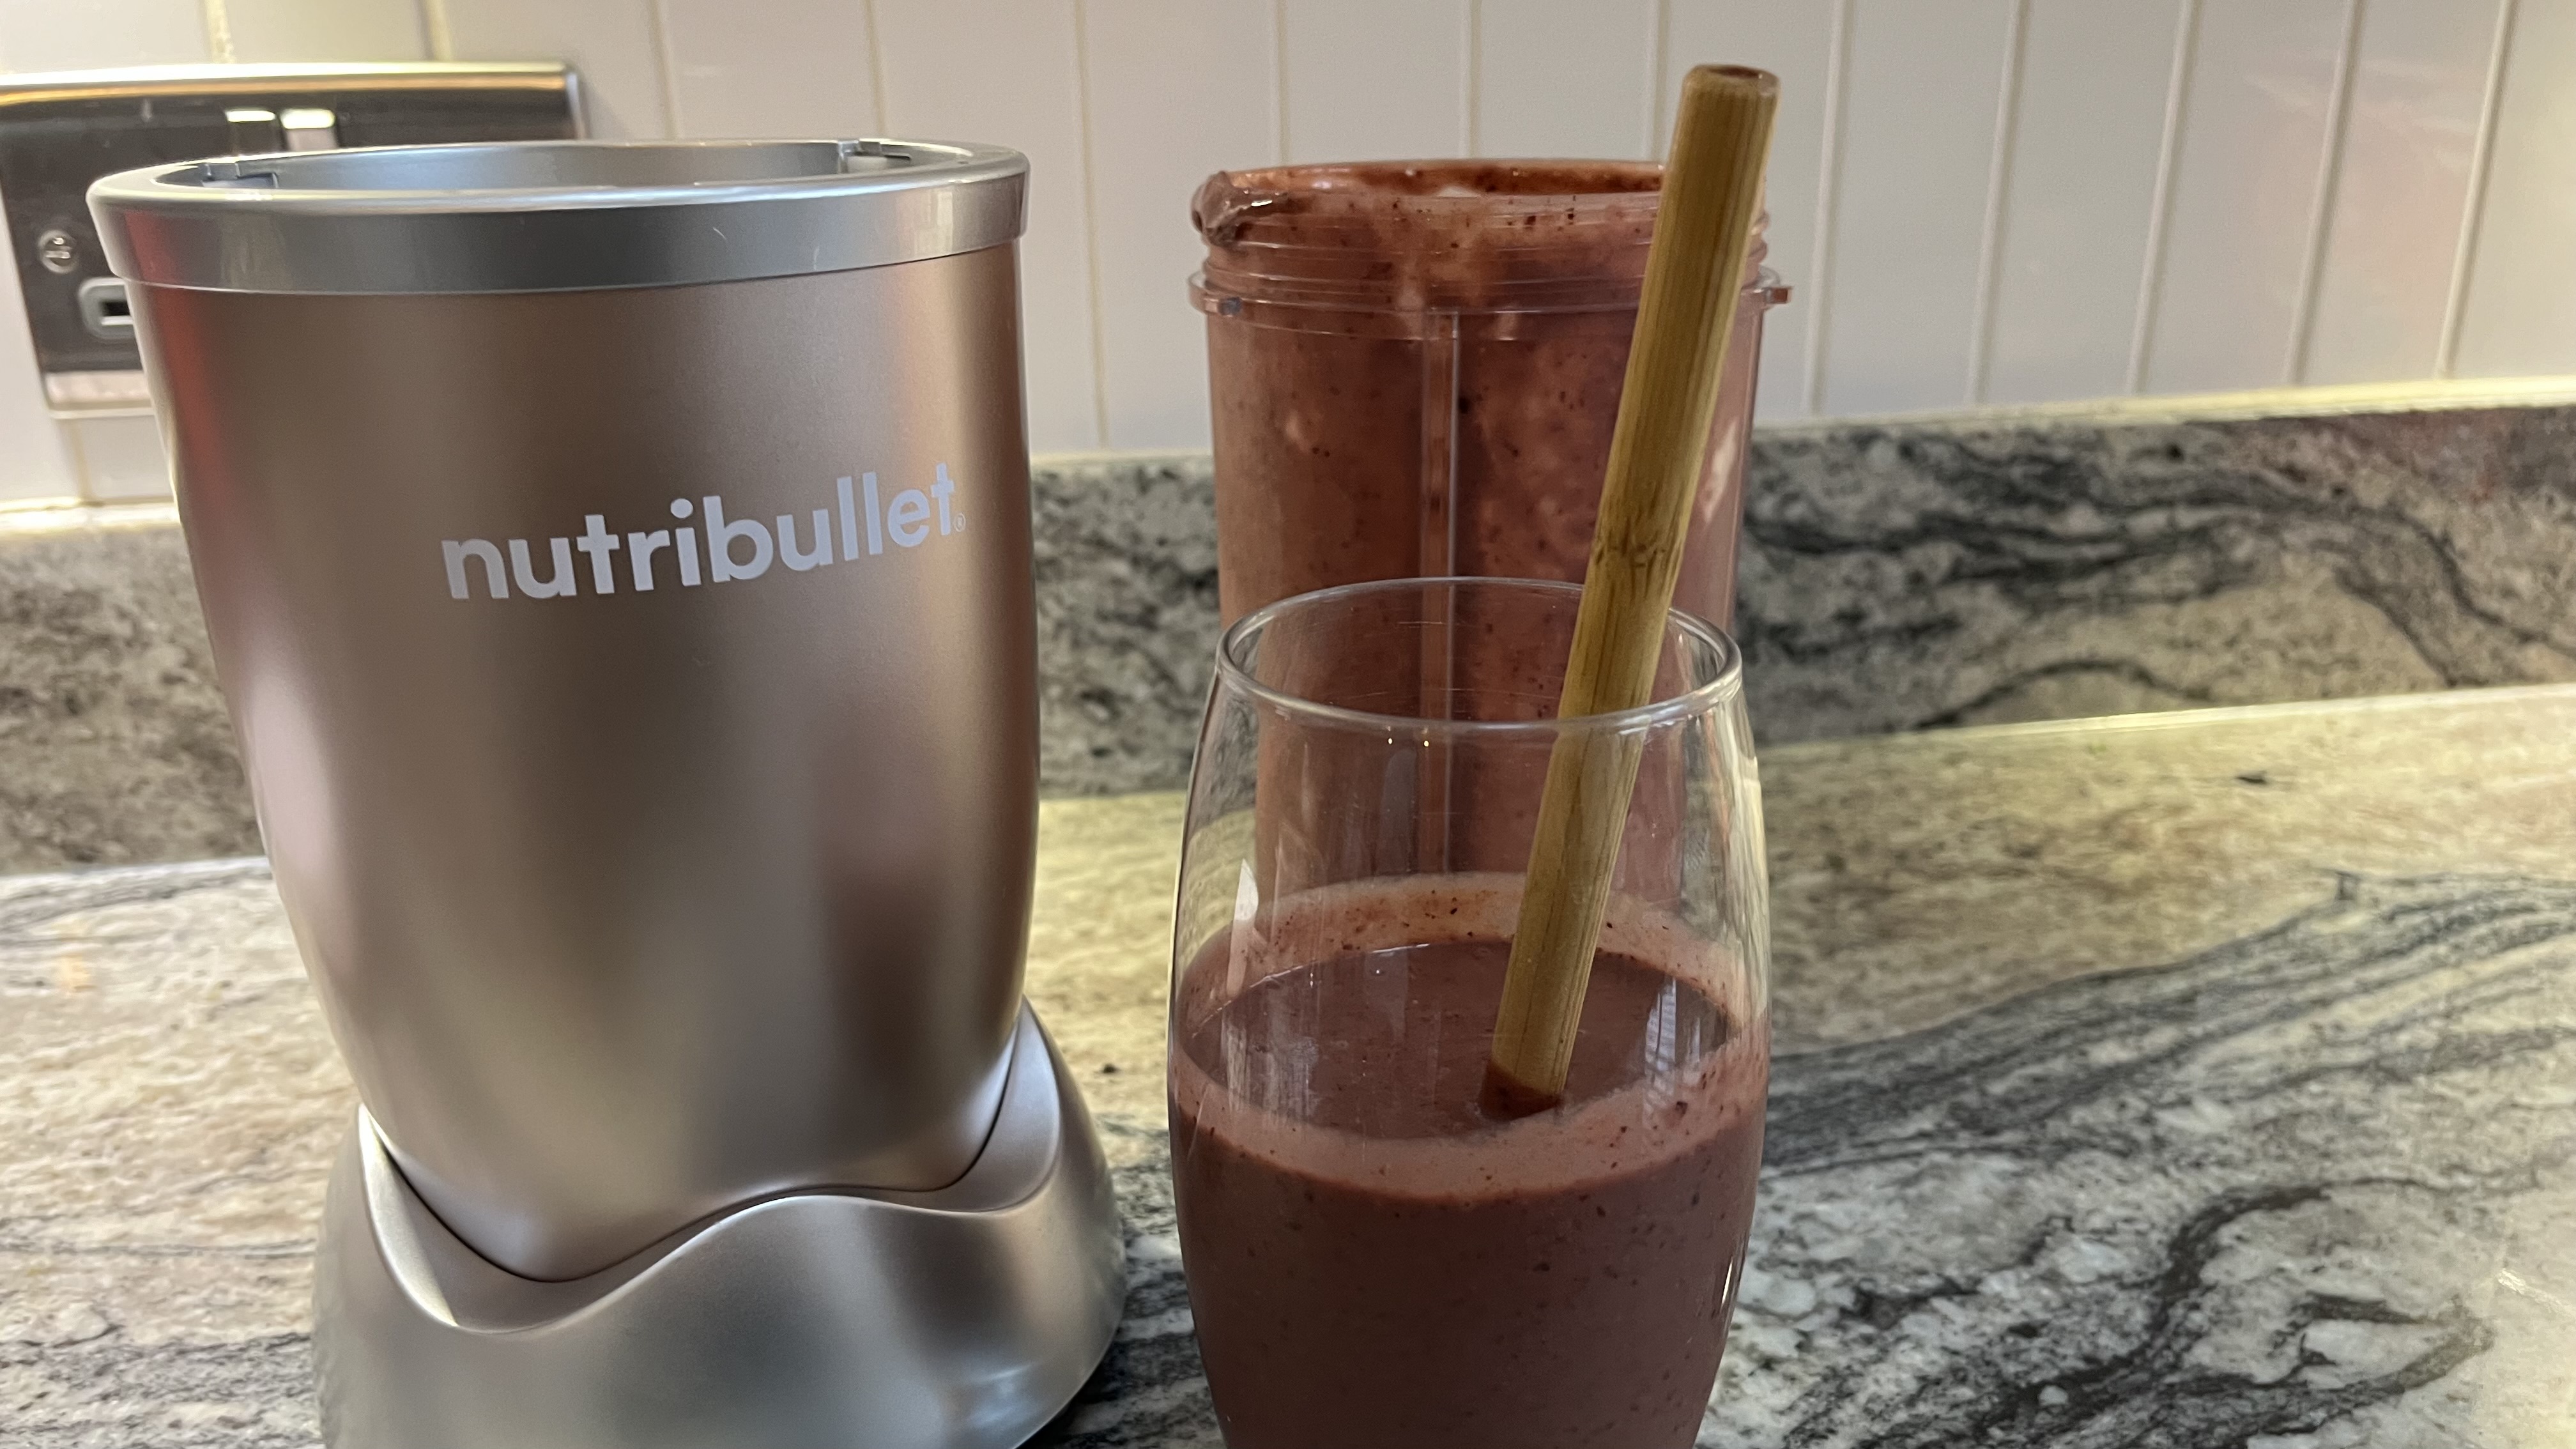 Nutribullet Pro 900 avocado and berry smoothie